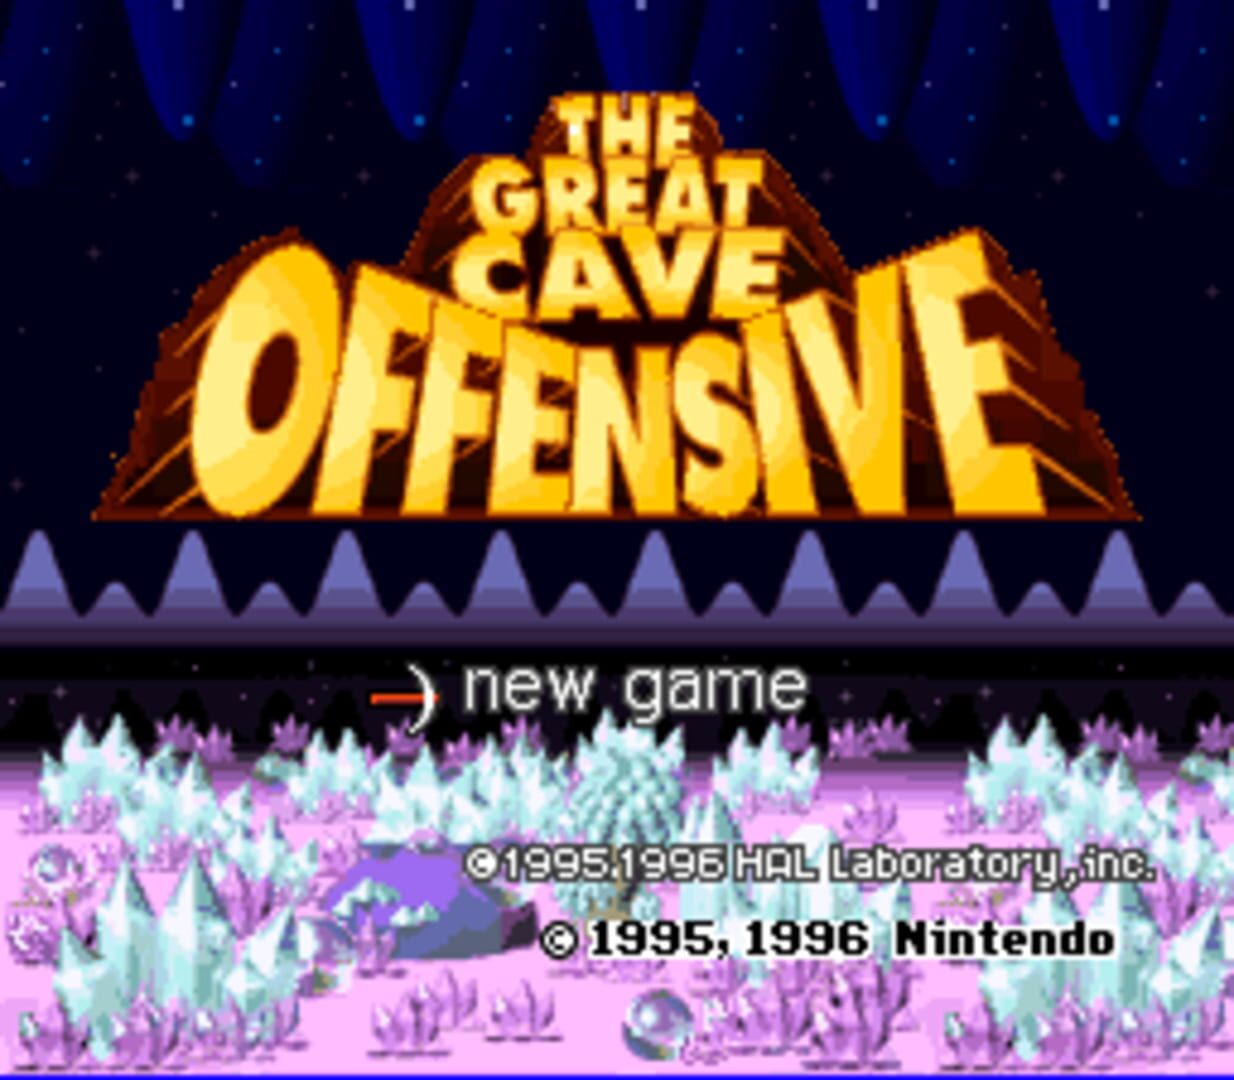 The Great Cave Offensive screenshot